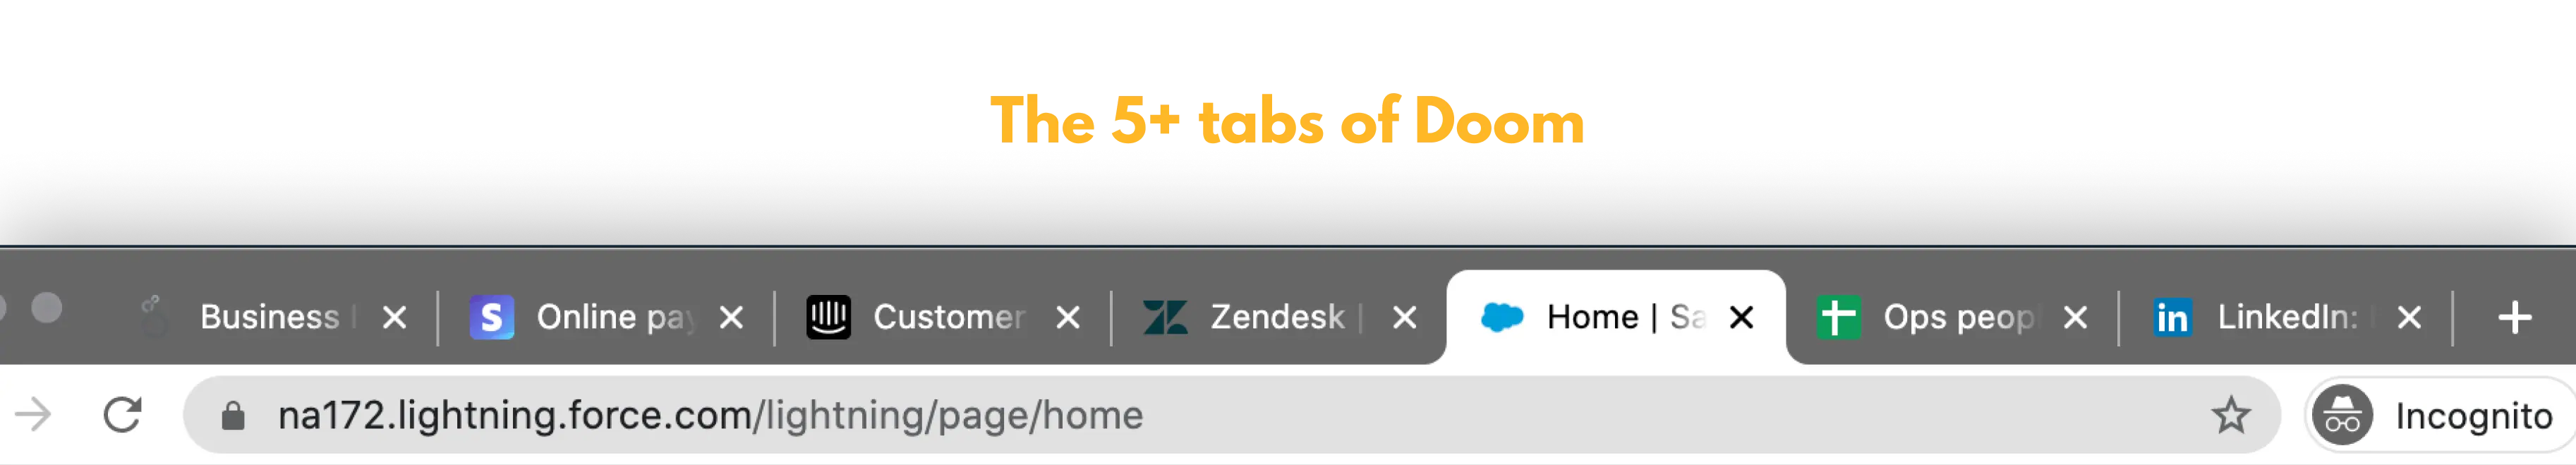 Data stack tools tabs